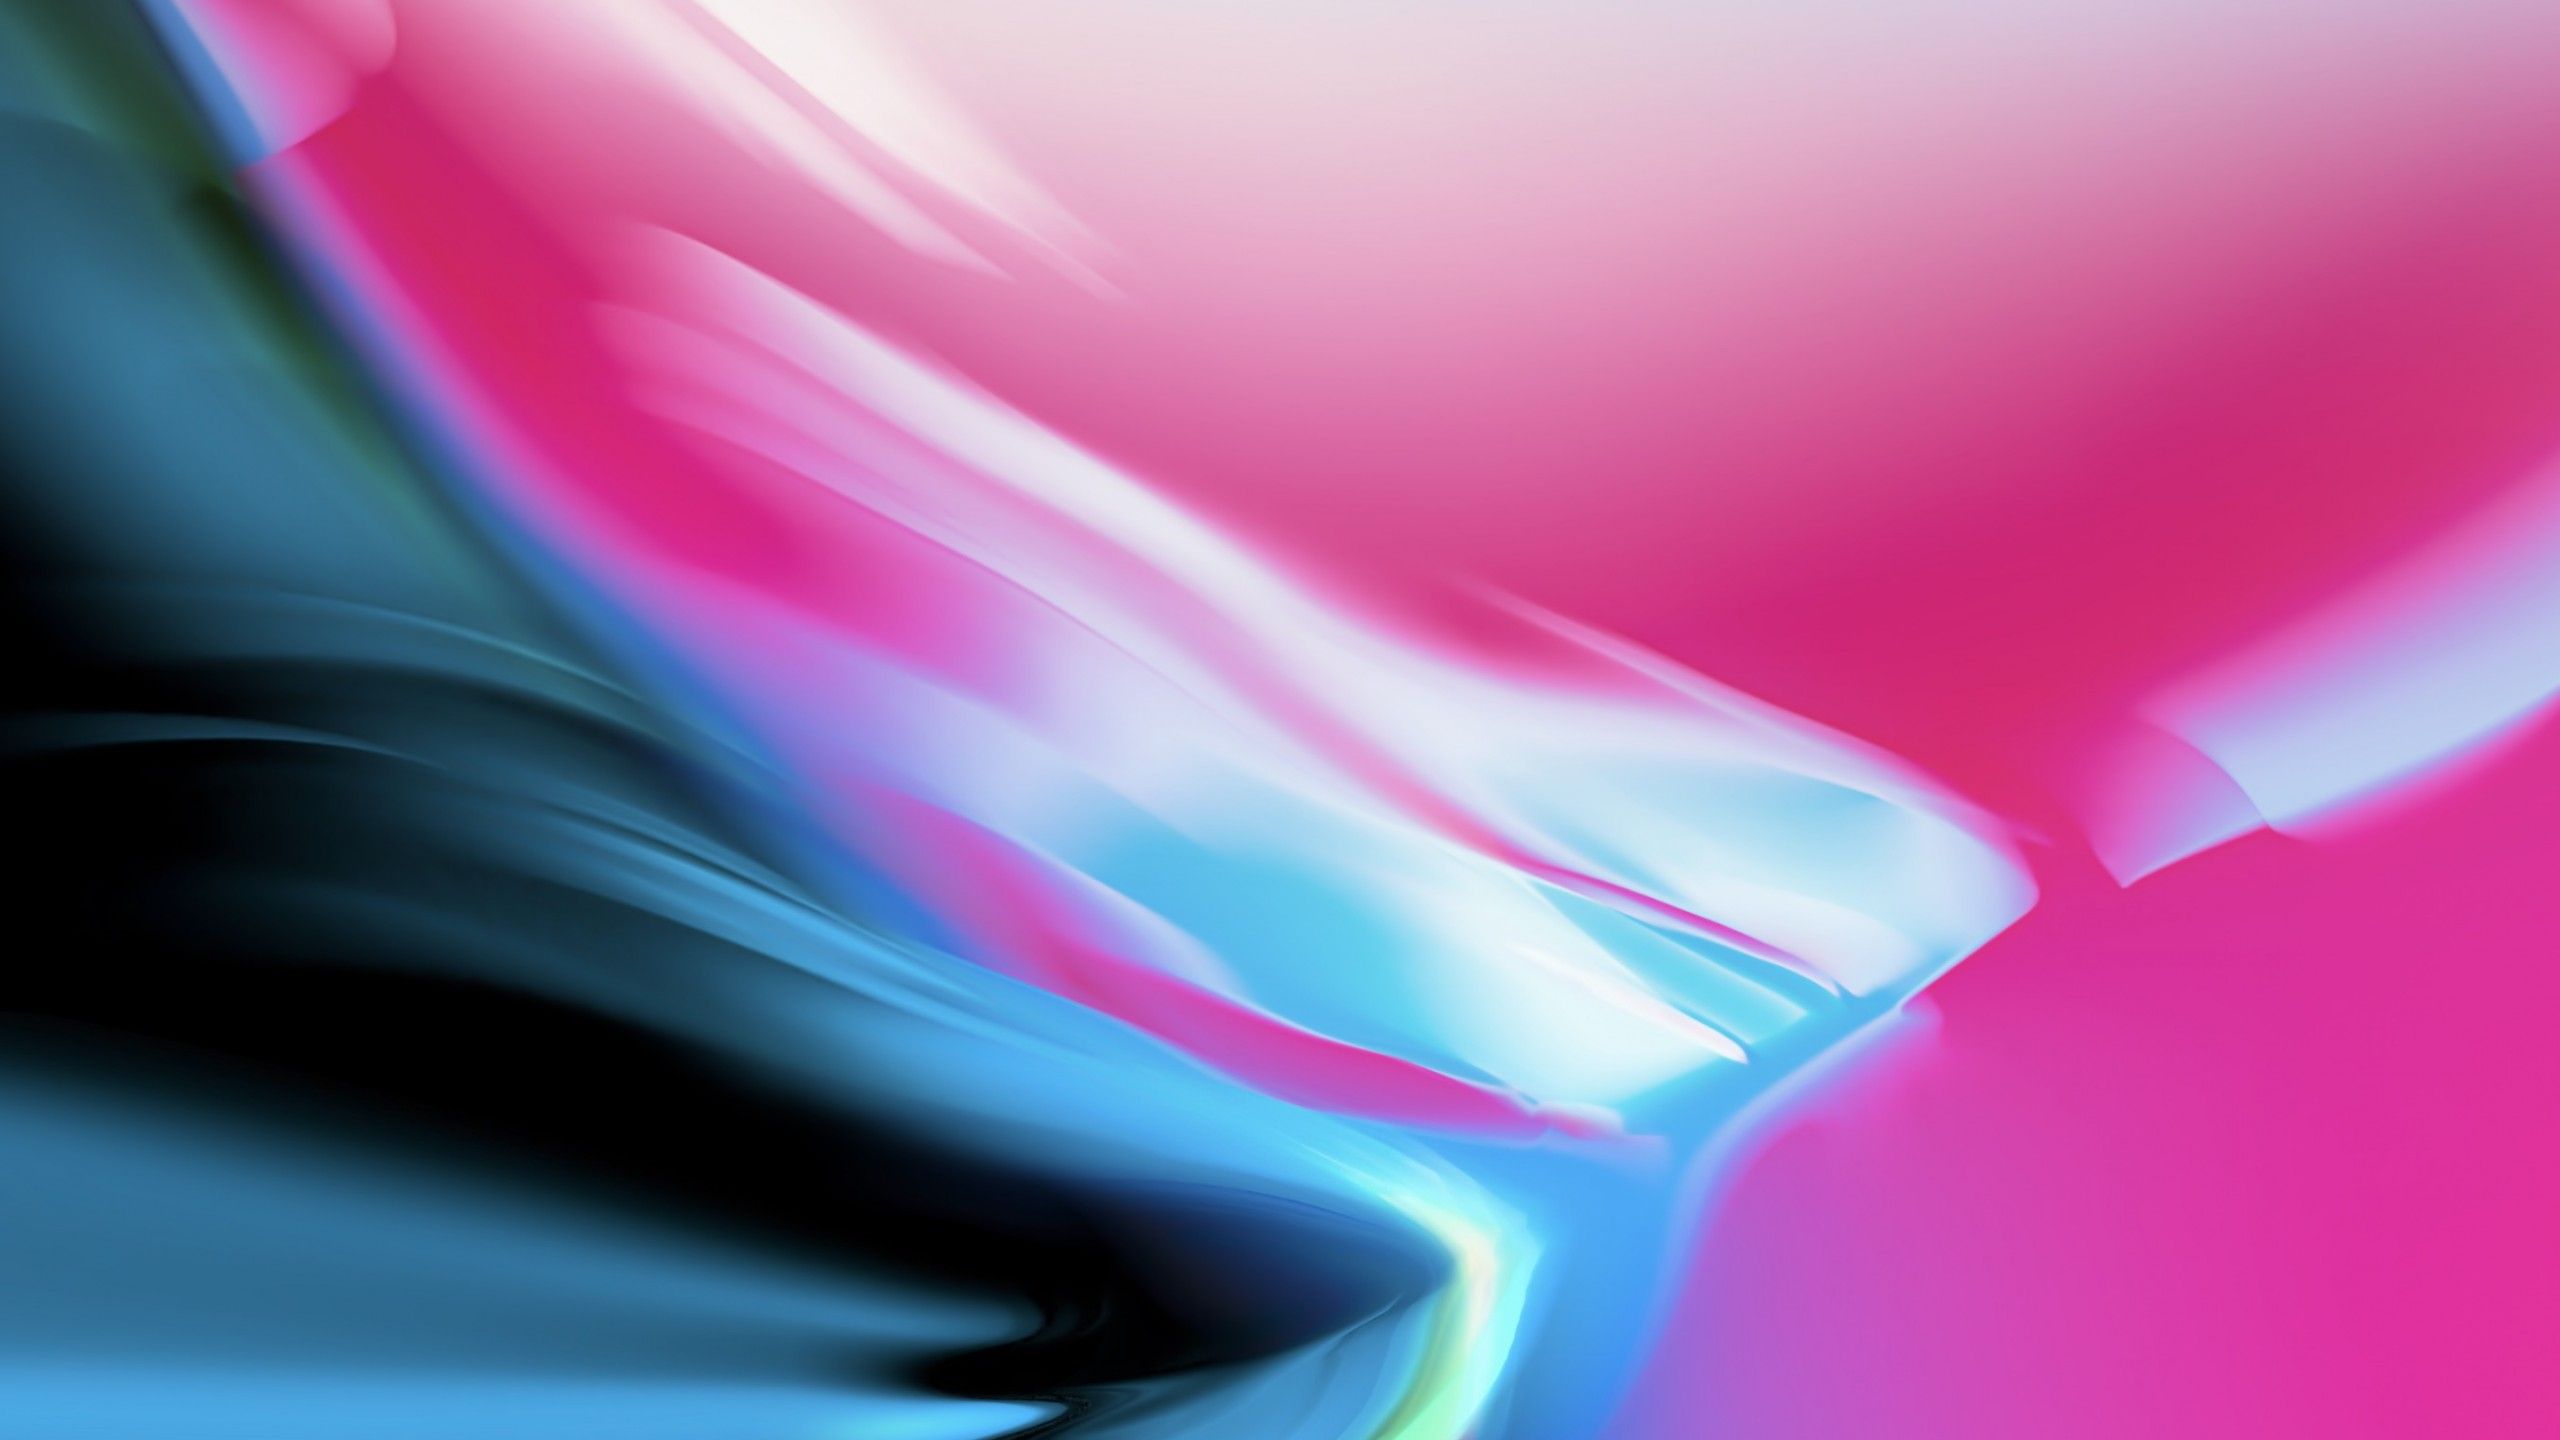 Apple iPhone X HD Wallpapers on WallpaperDog